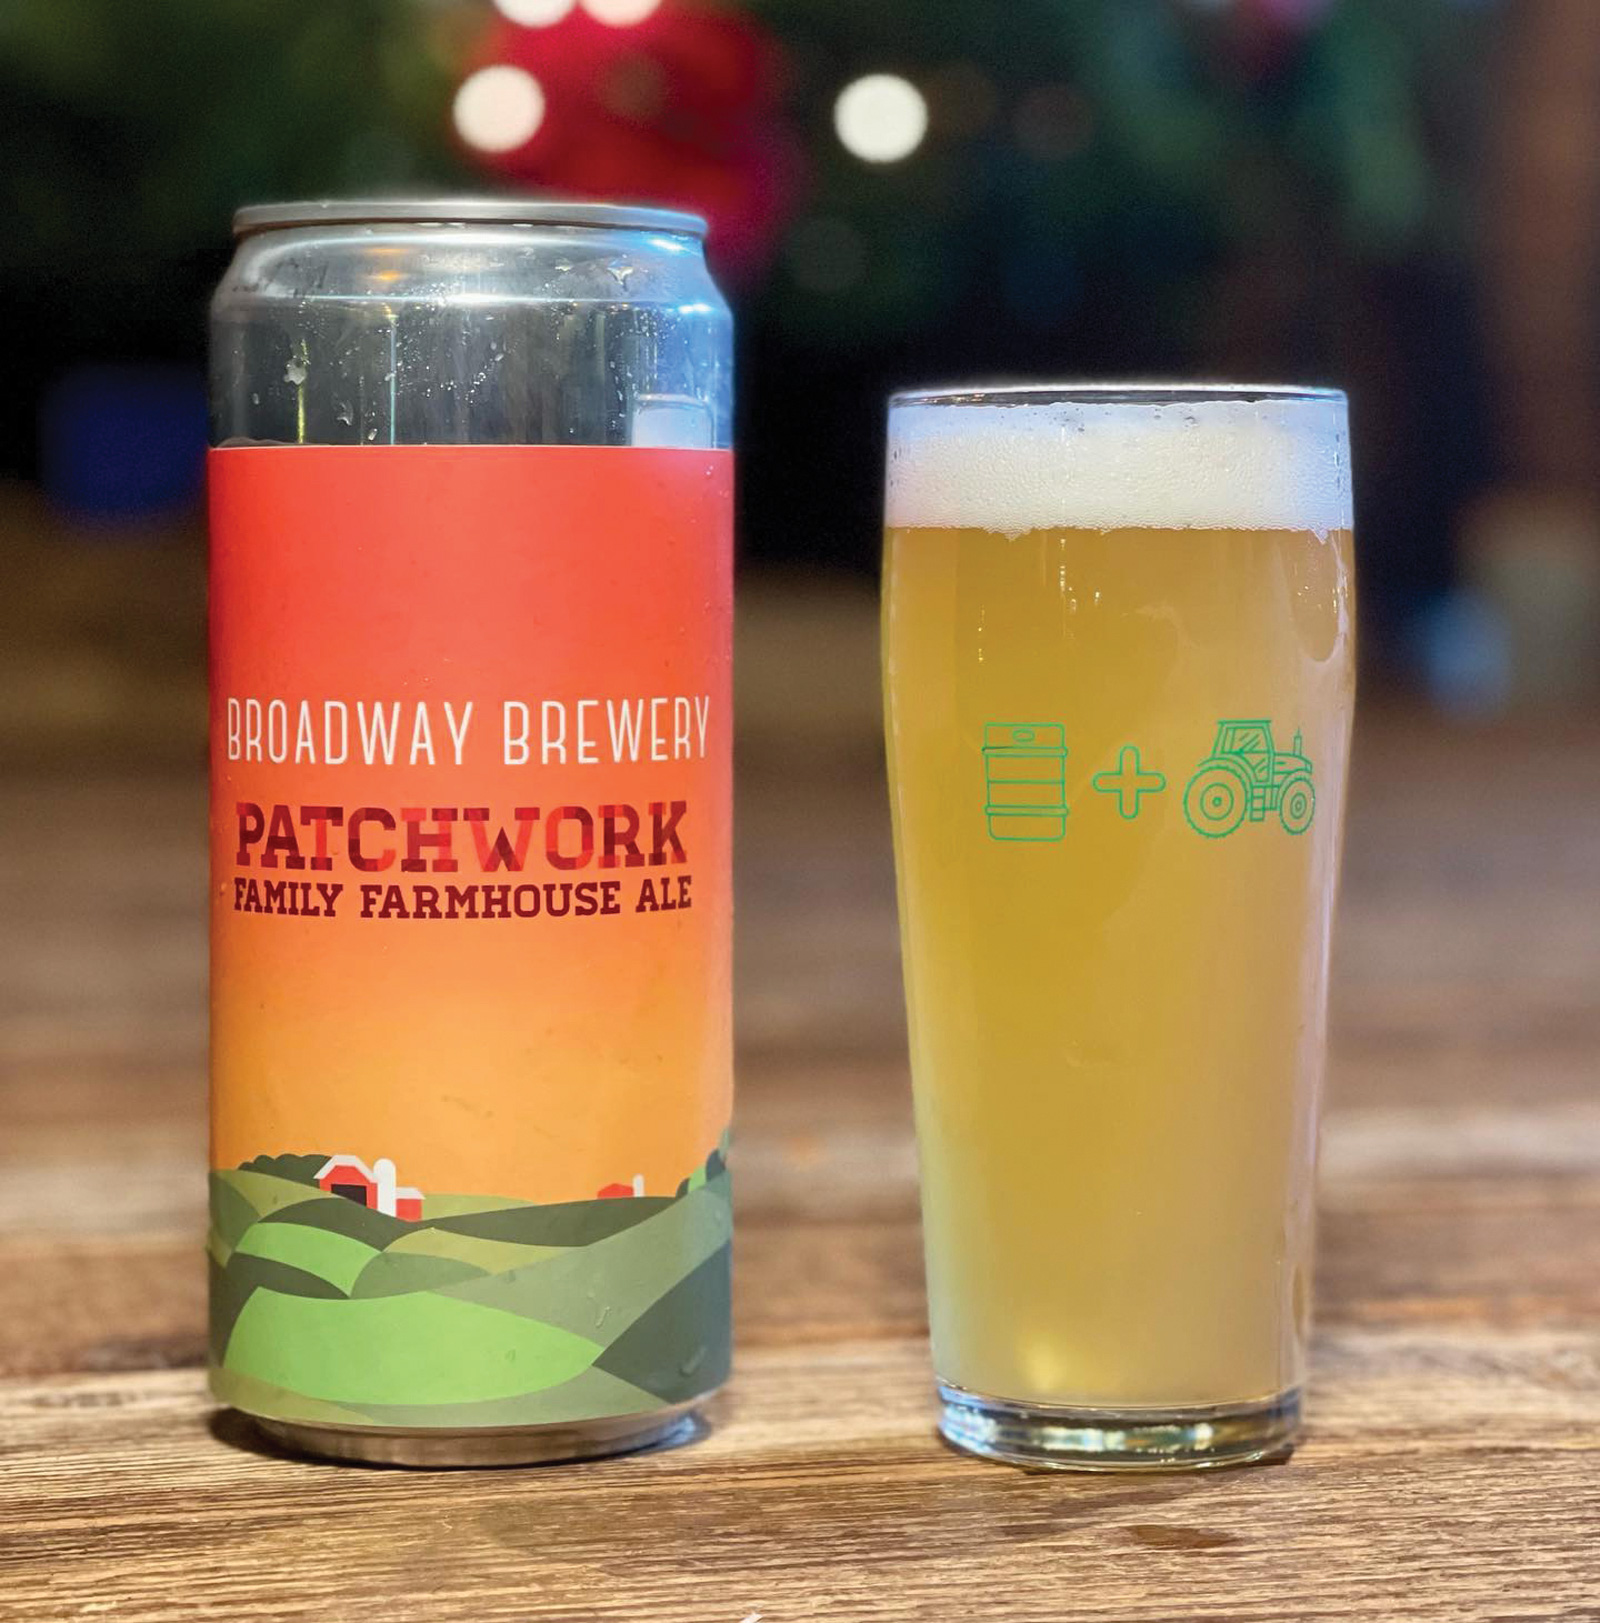 Broadway Brewery Patchwork Farms Beer